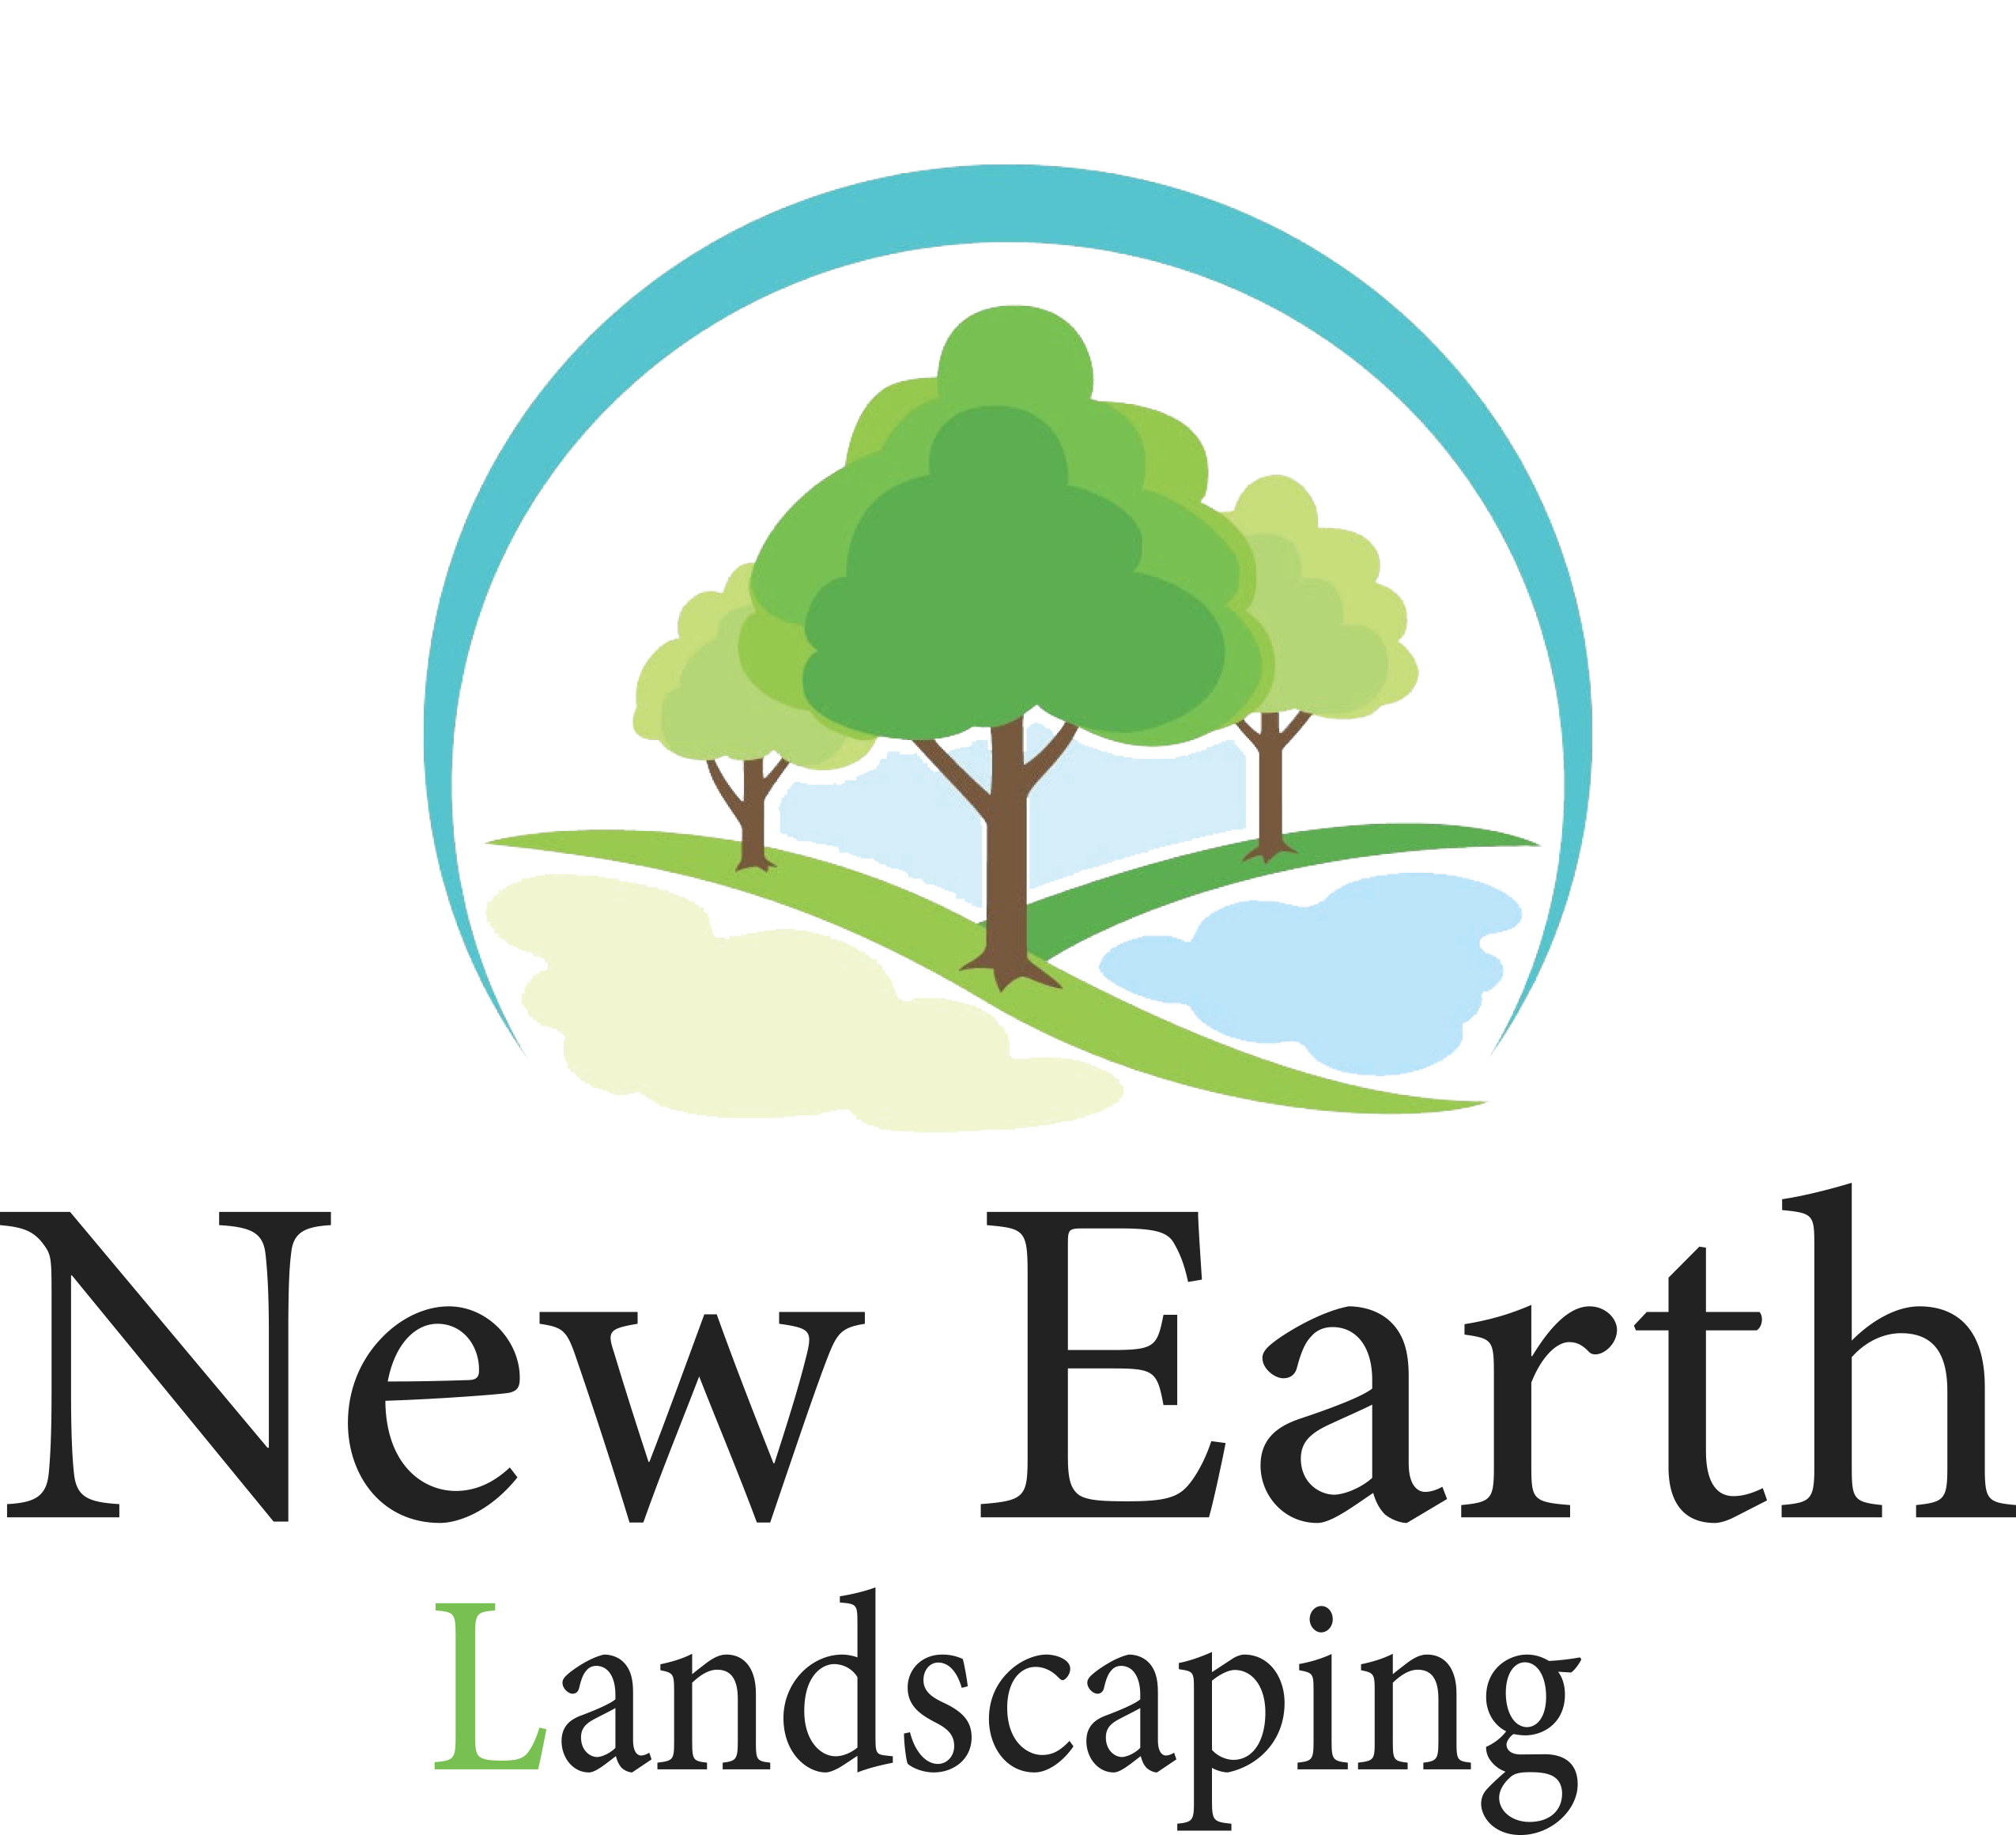 New Earth Landscaping Logo